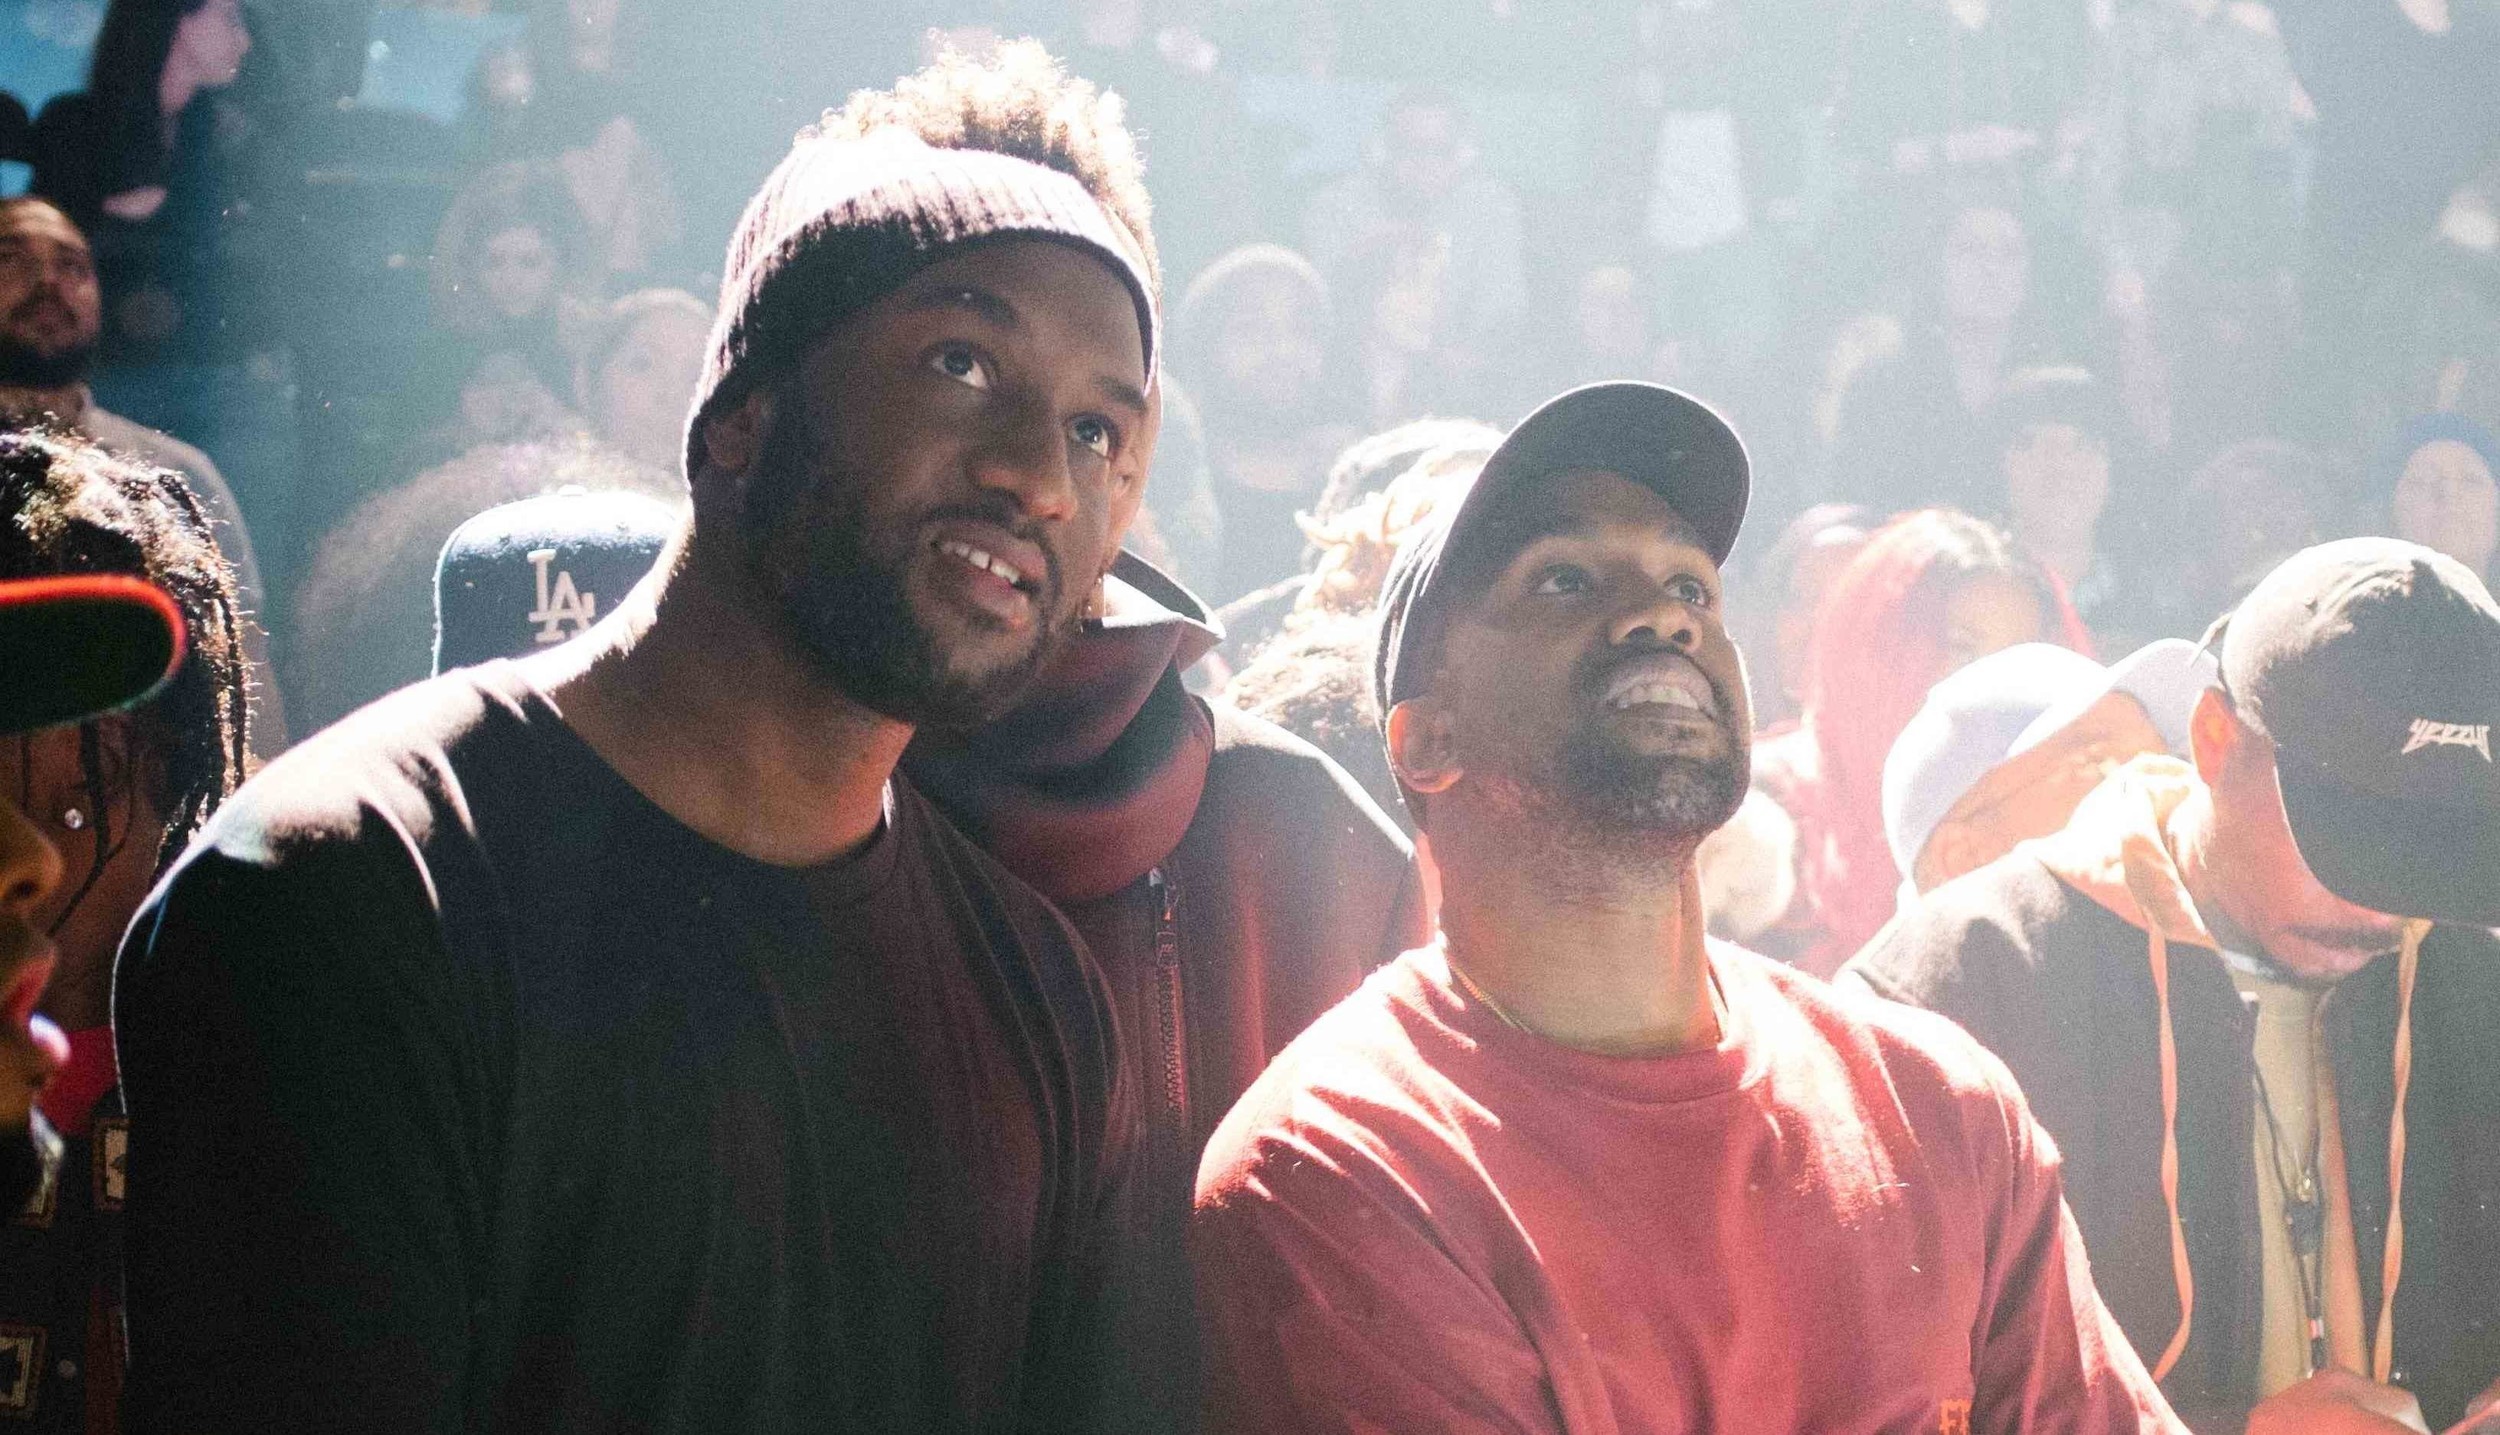 Exclusive pictures from backstage at Kanye West's DONDA event